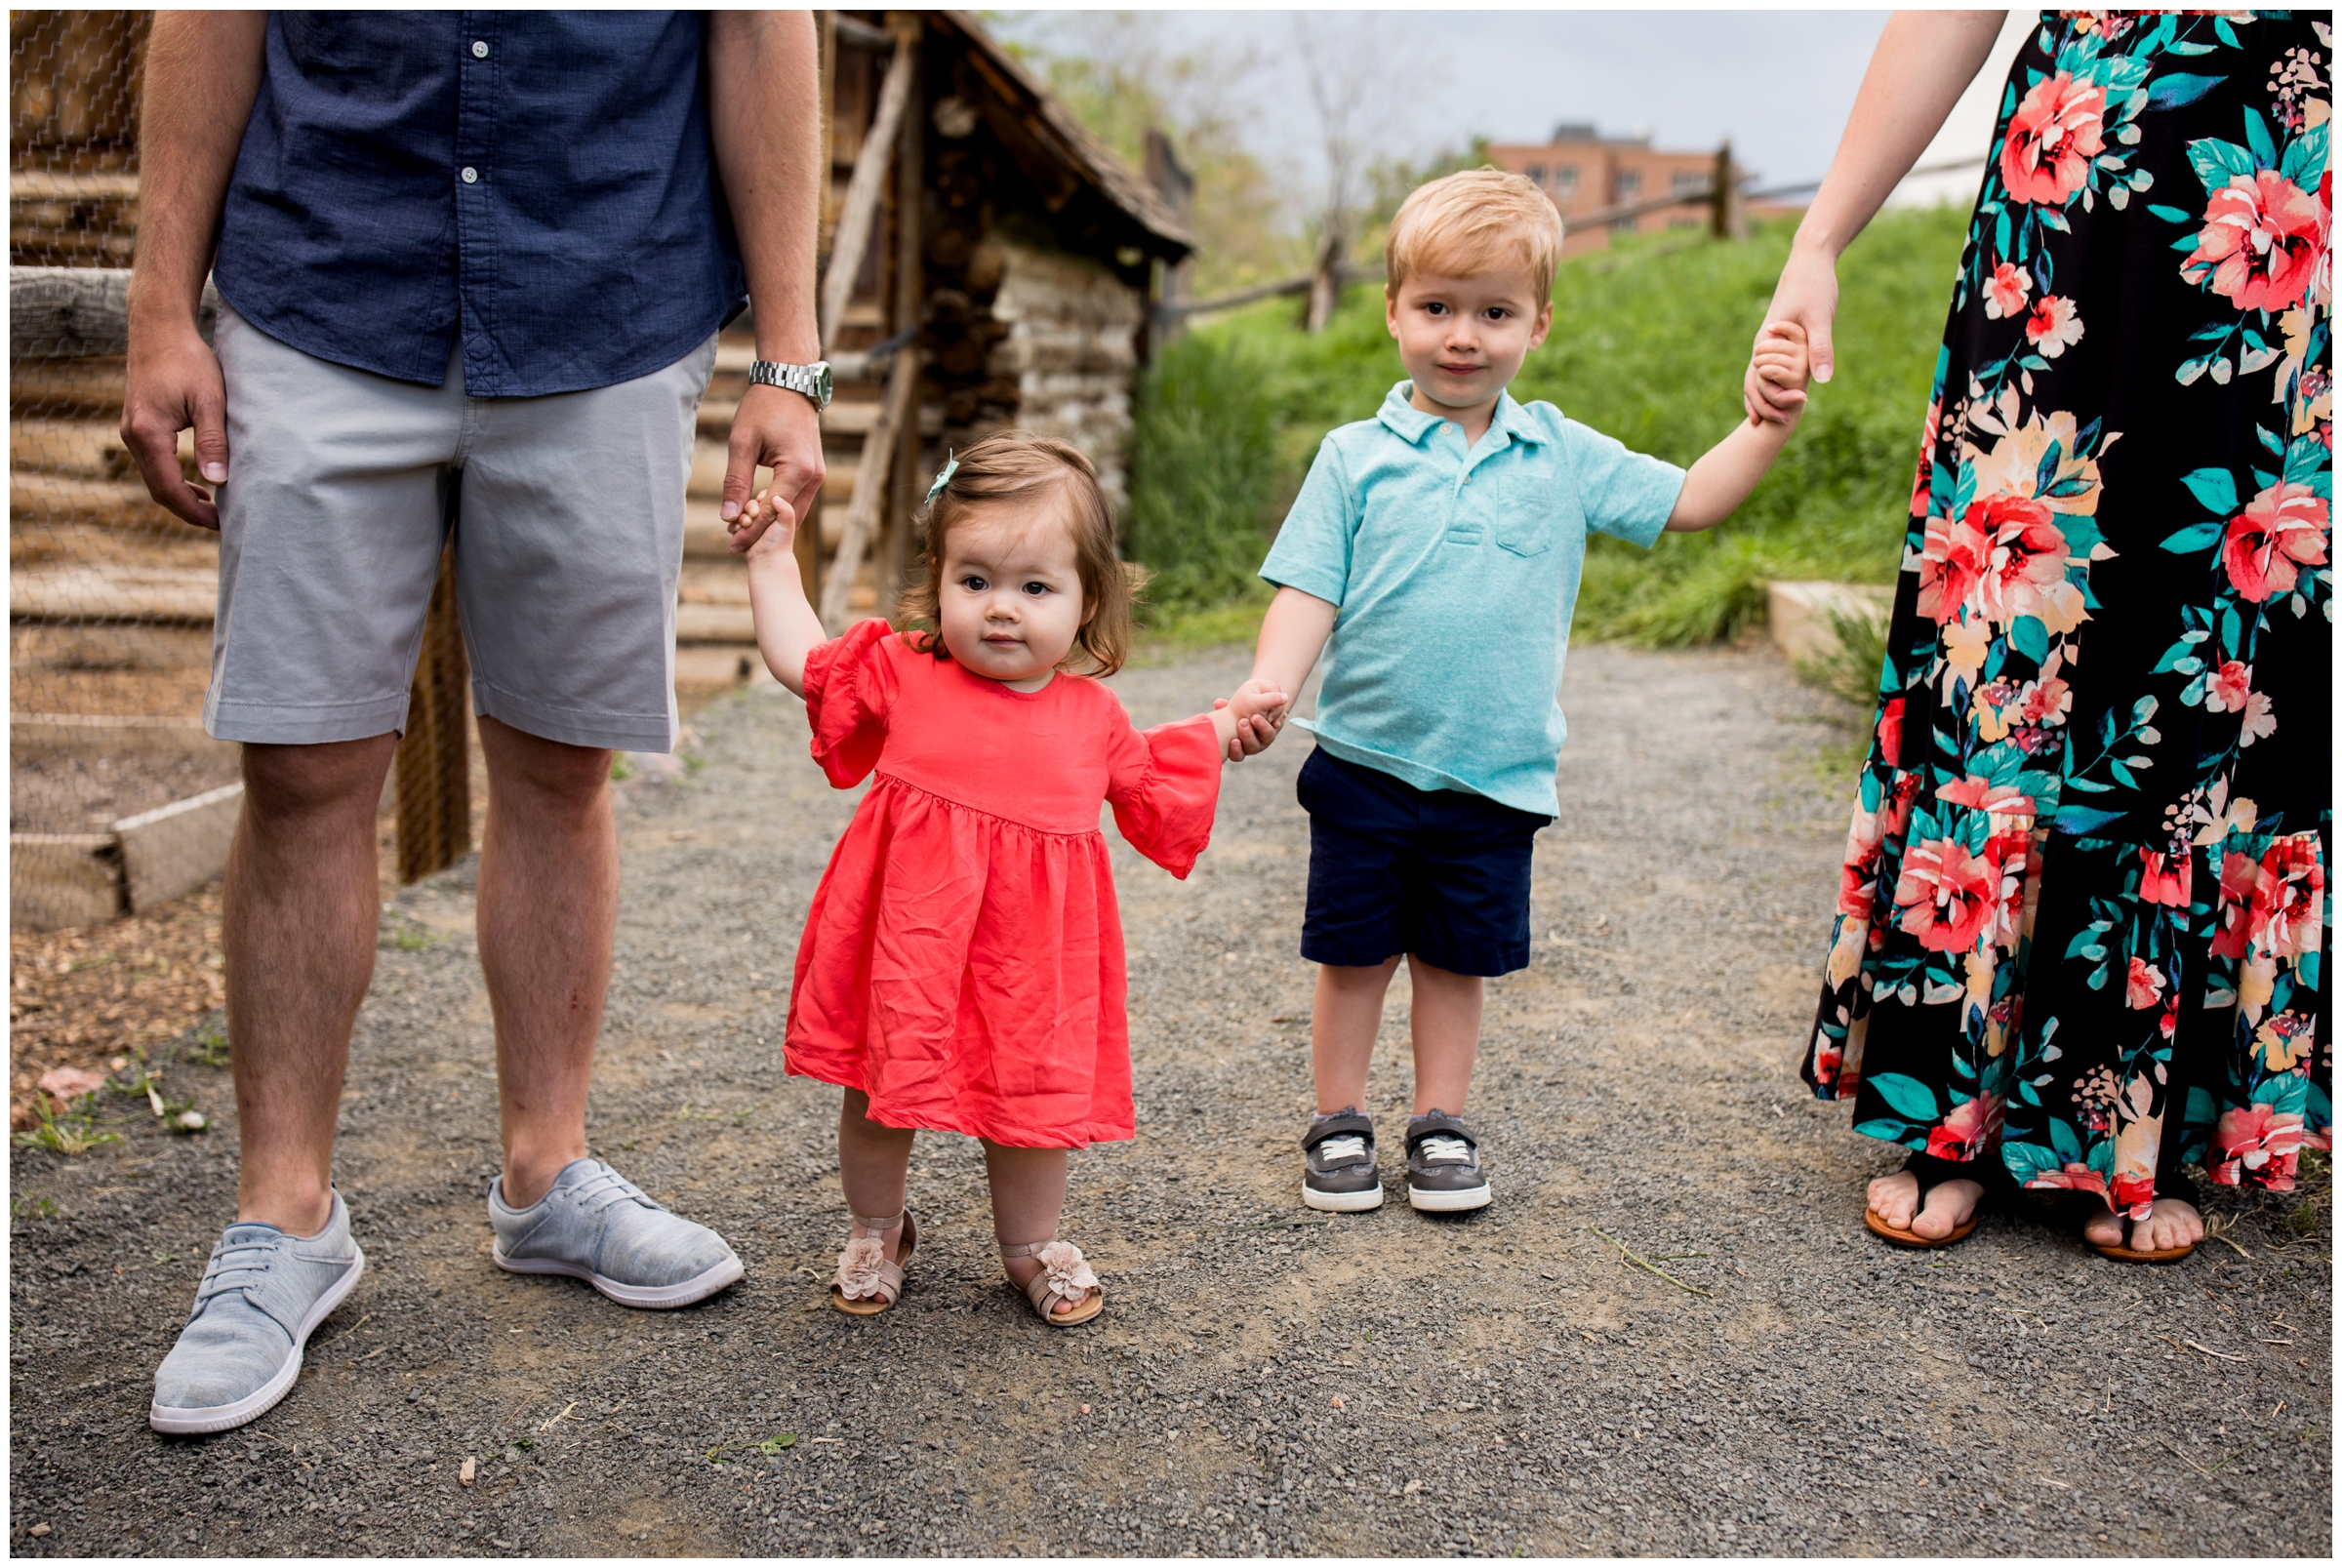 Colorado child photography at rustic history park 